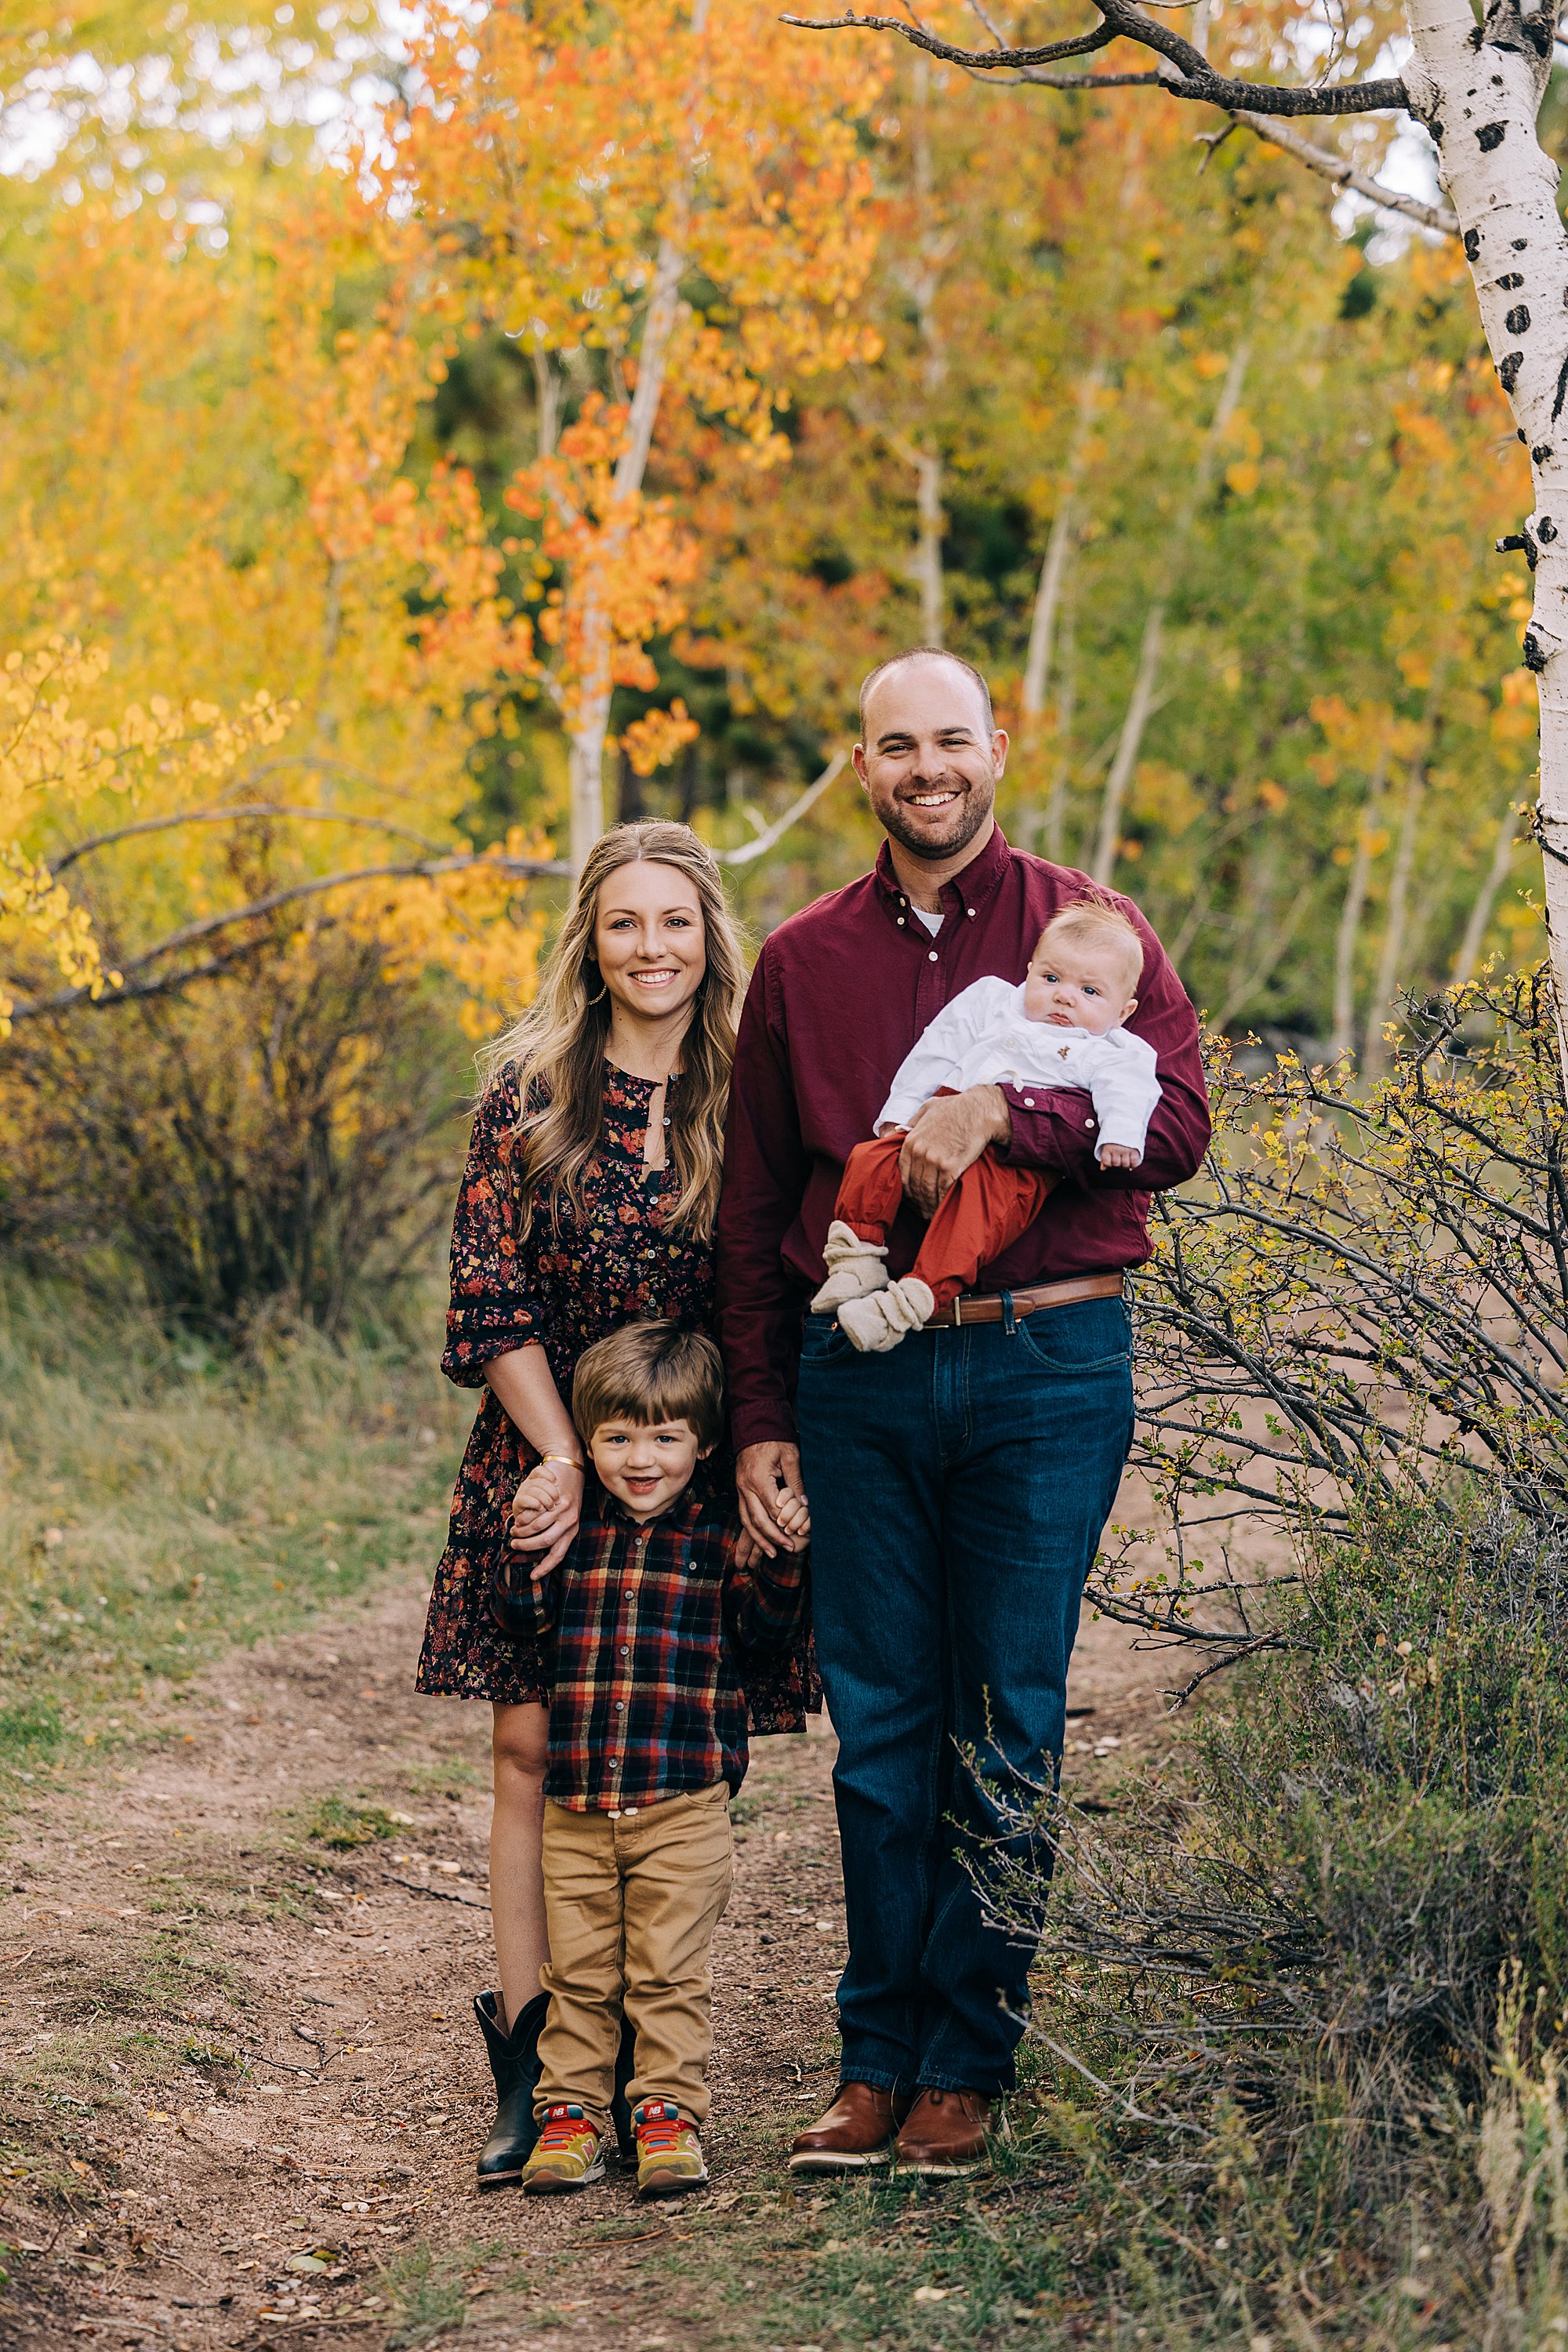 What to wear for extended family portraits {Franklin Family